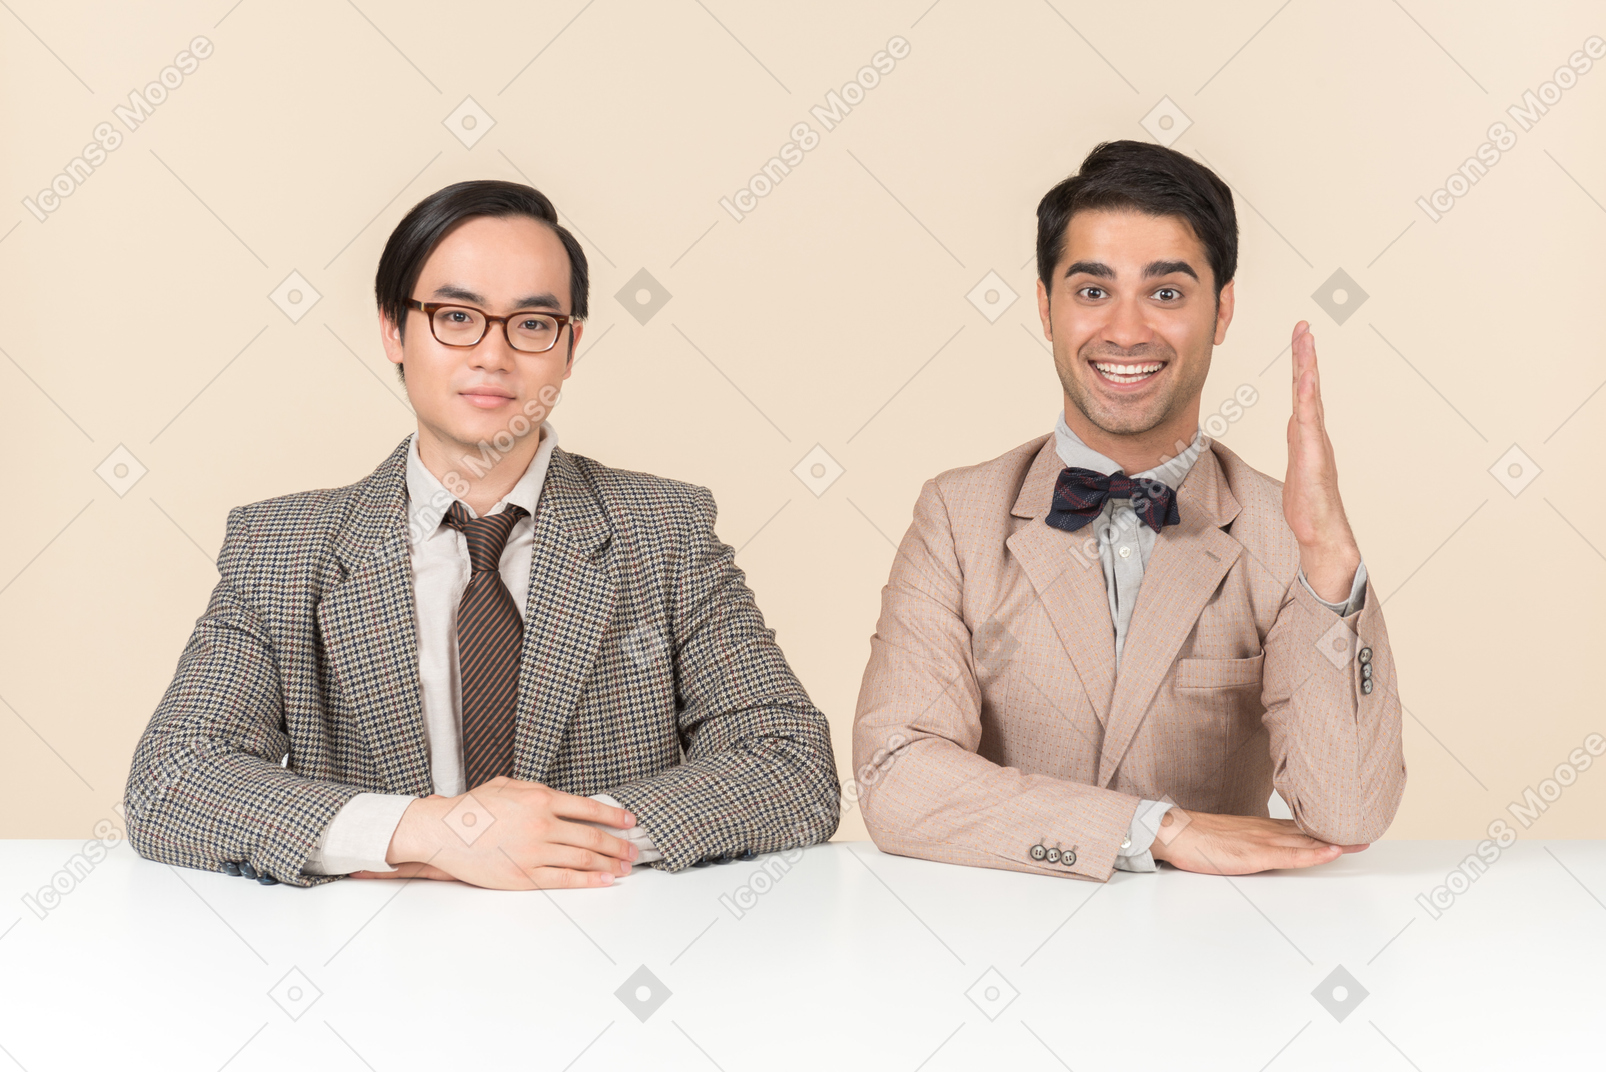 Two young nerds sitting at the table and one of them is raising hand